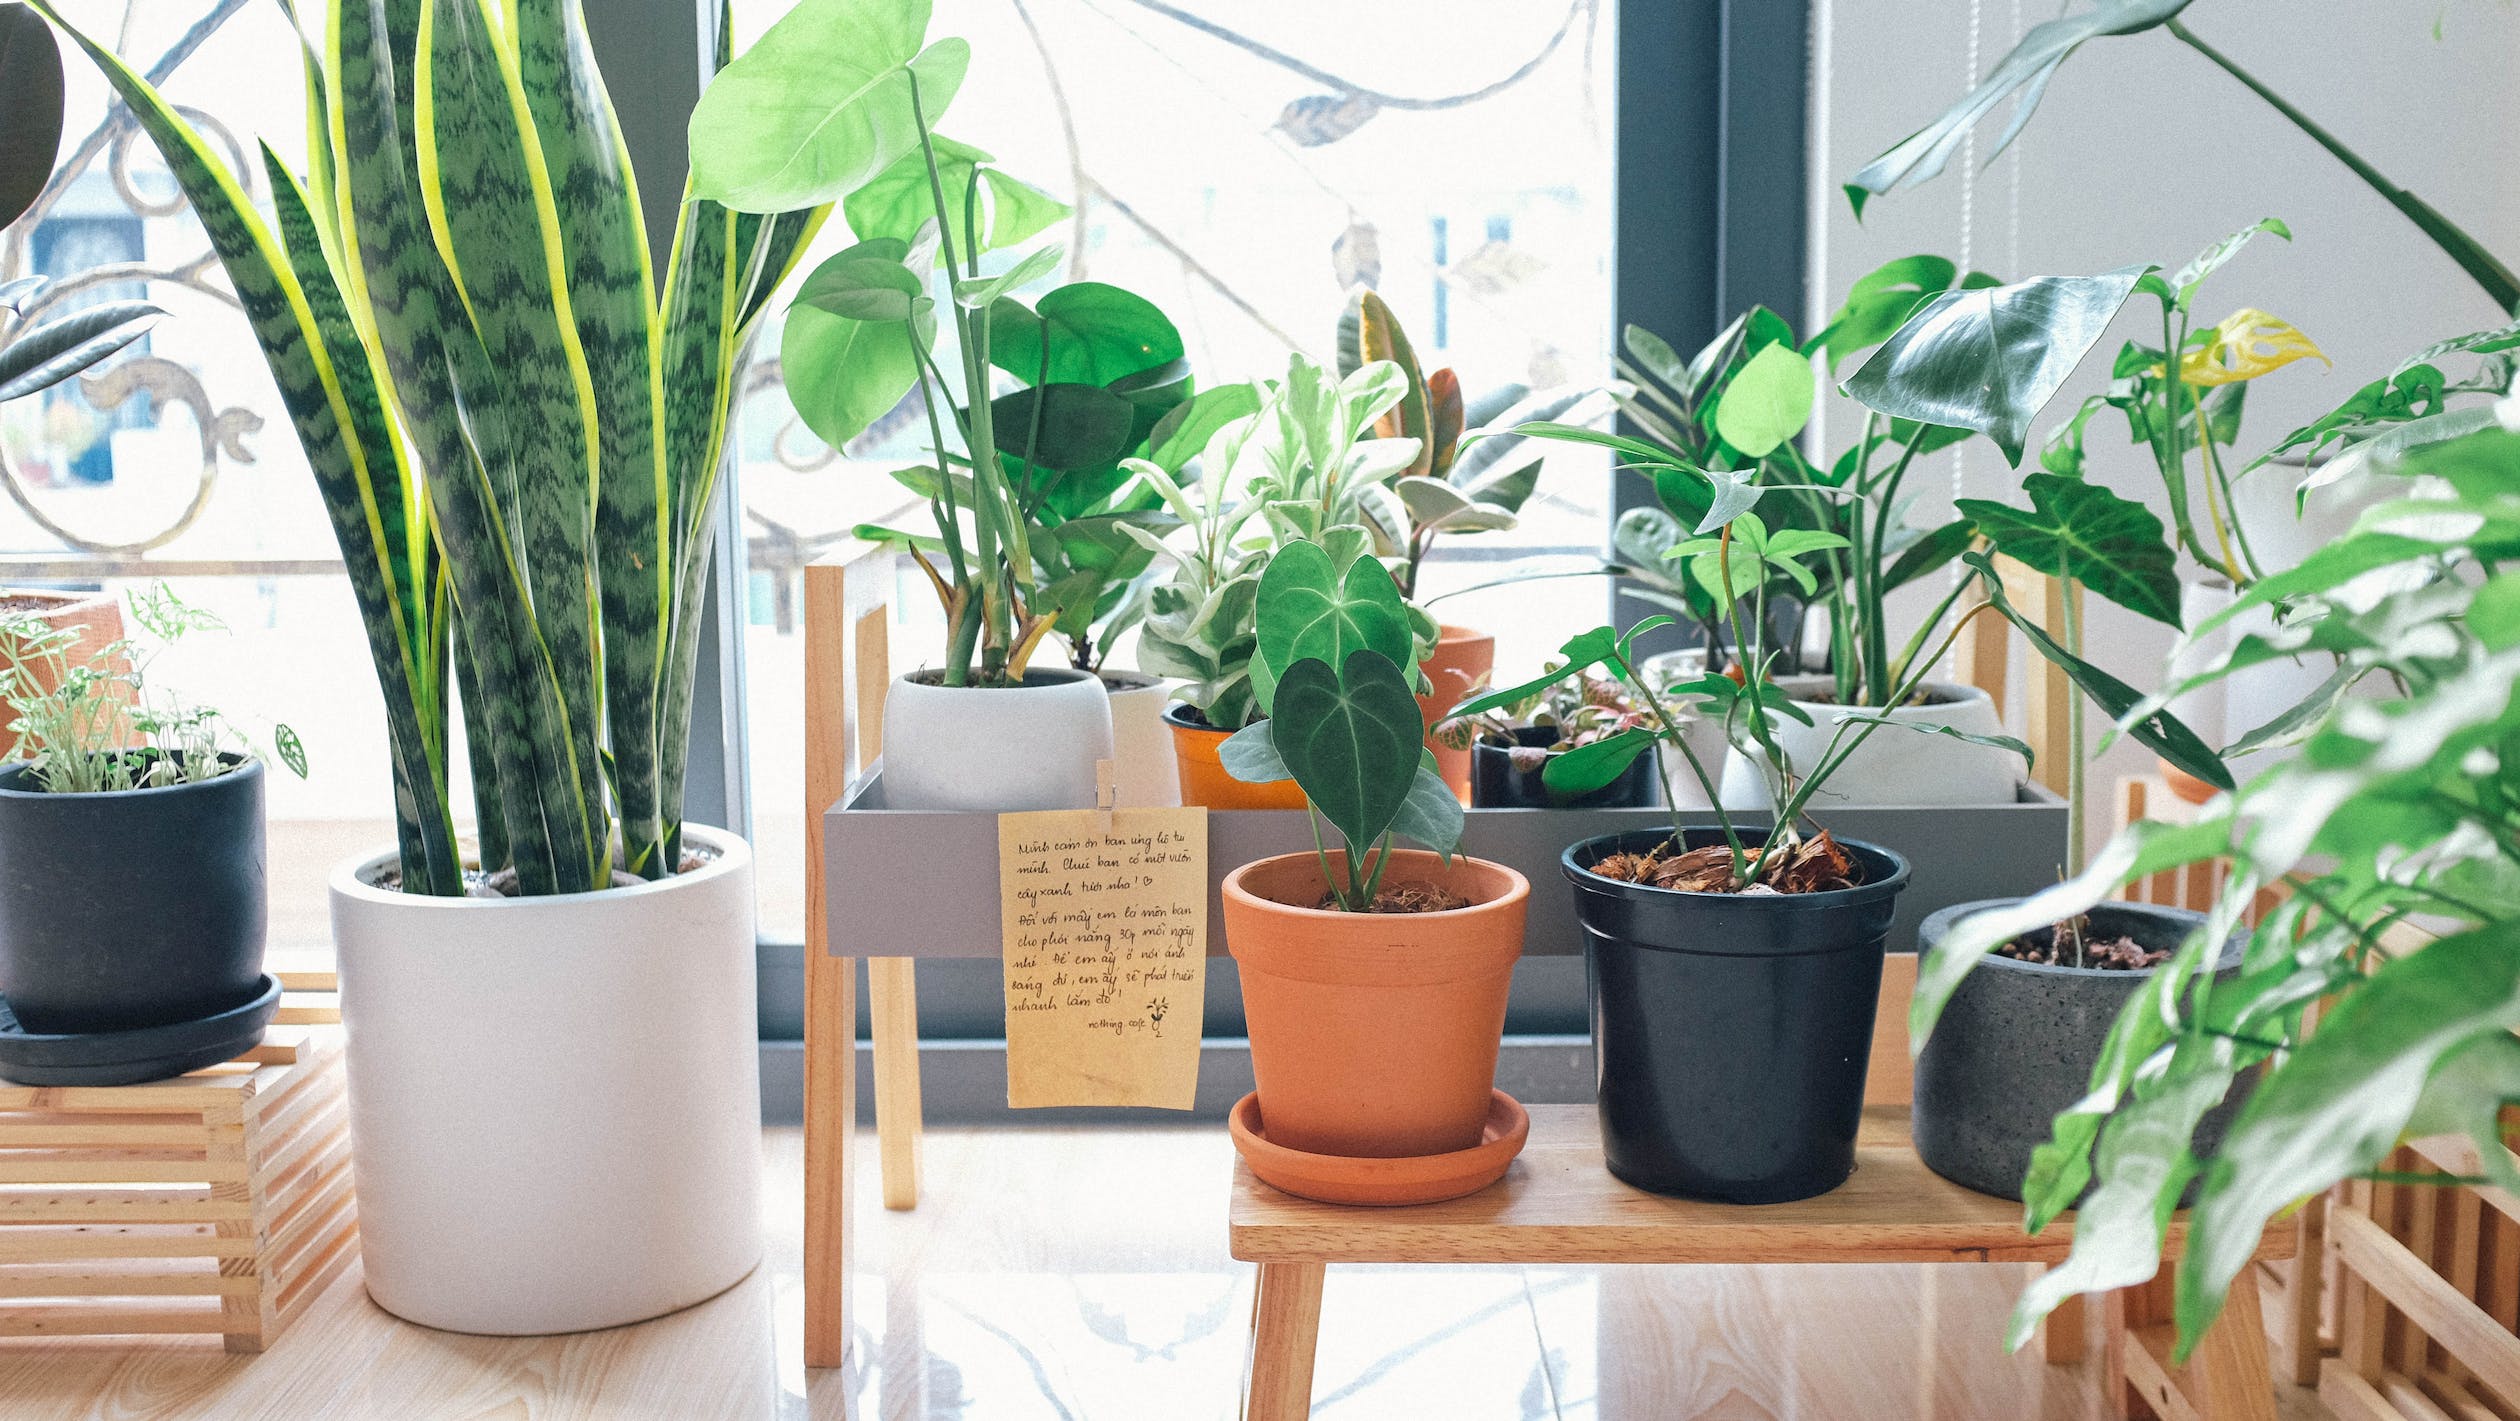 The Three Big Things to Consider When Taking Care of Plants